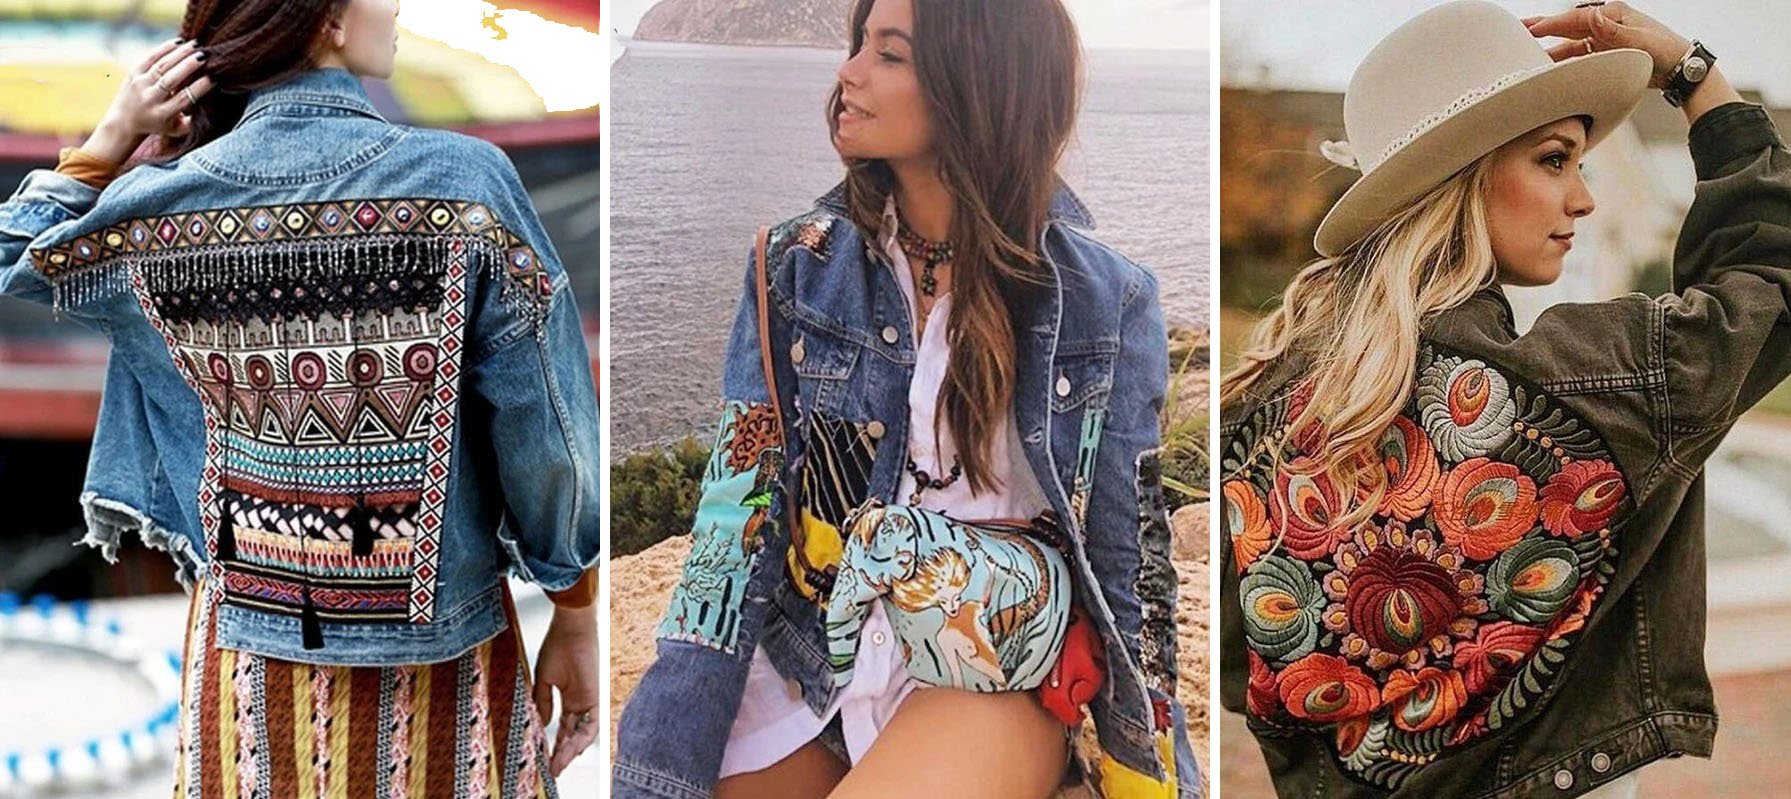 The denim jacket, for a casual look